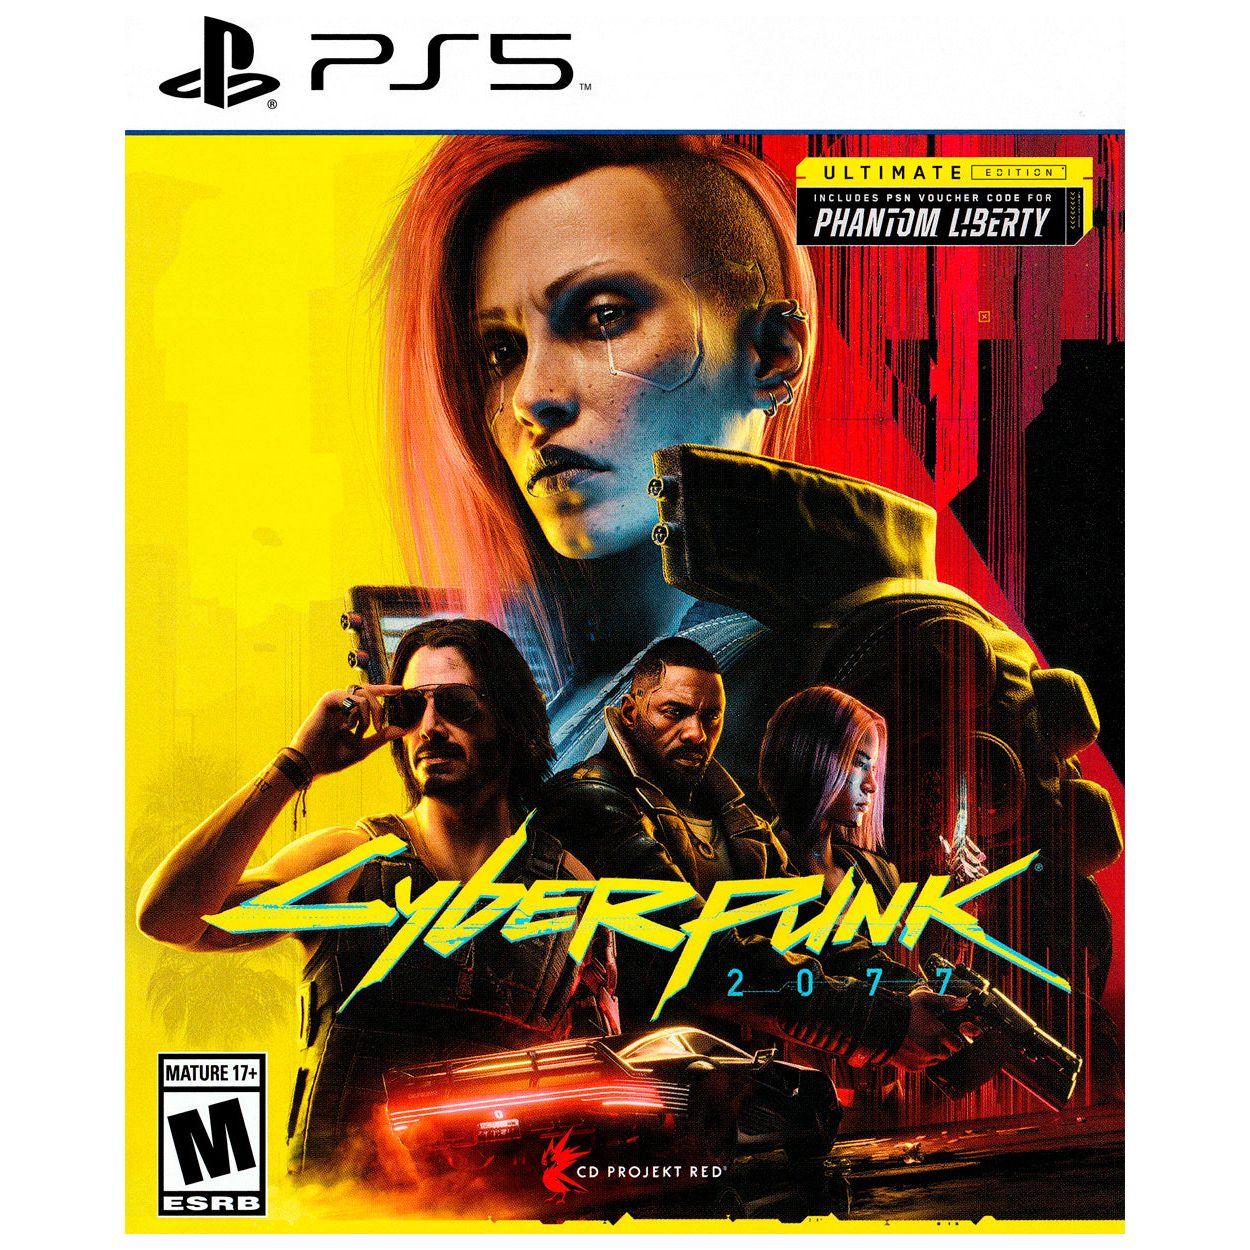 PS5 - Cyberpunk 2077 Ultimate Edition (Sealed)